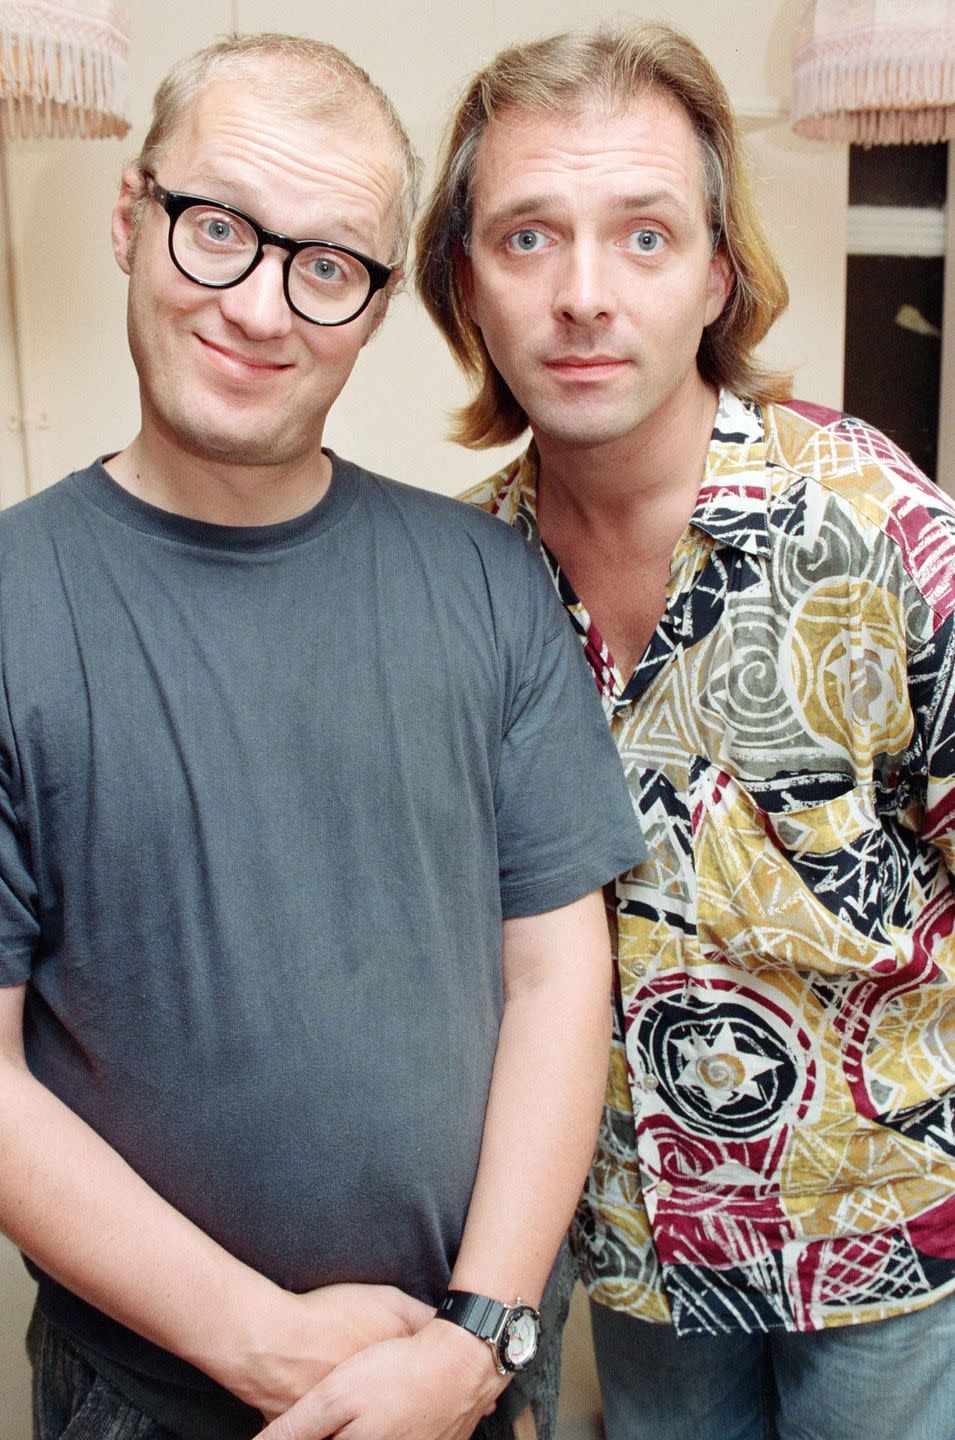 rik mayall and ade edmondson, 20th september 1991 photo by daily mirrormirrorpixmirrorpix via getty images